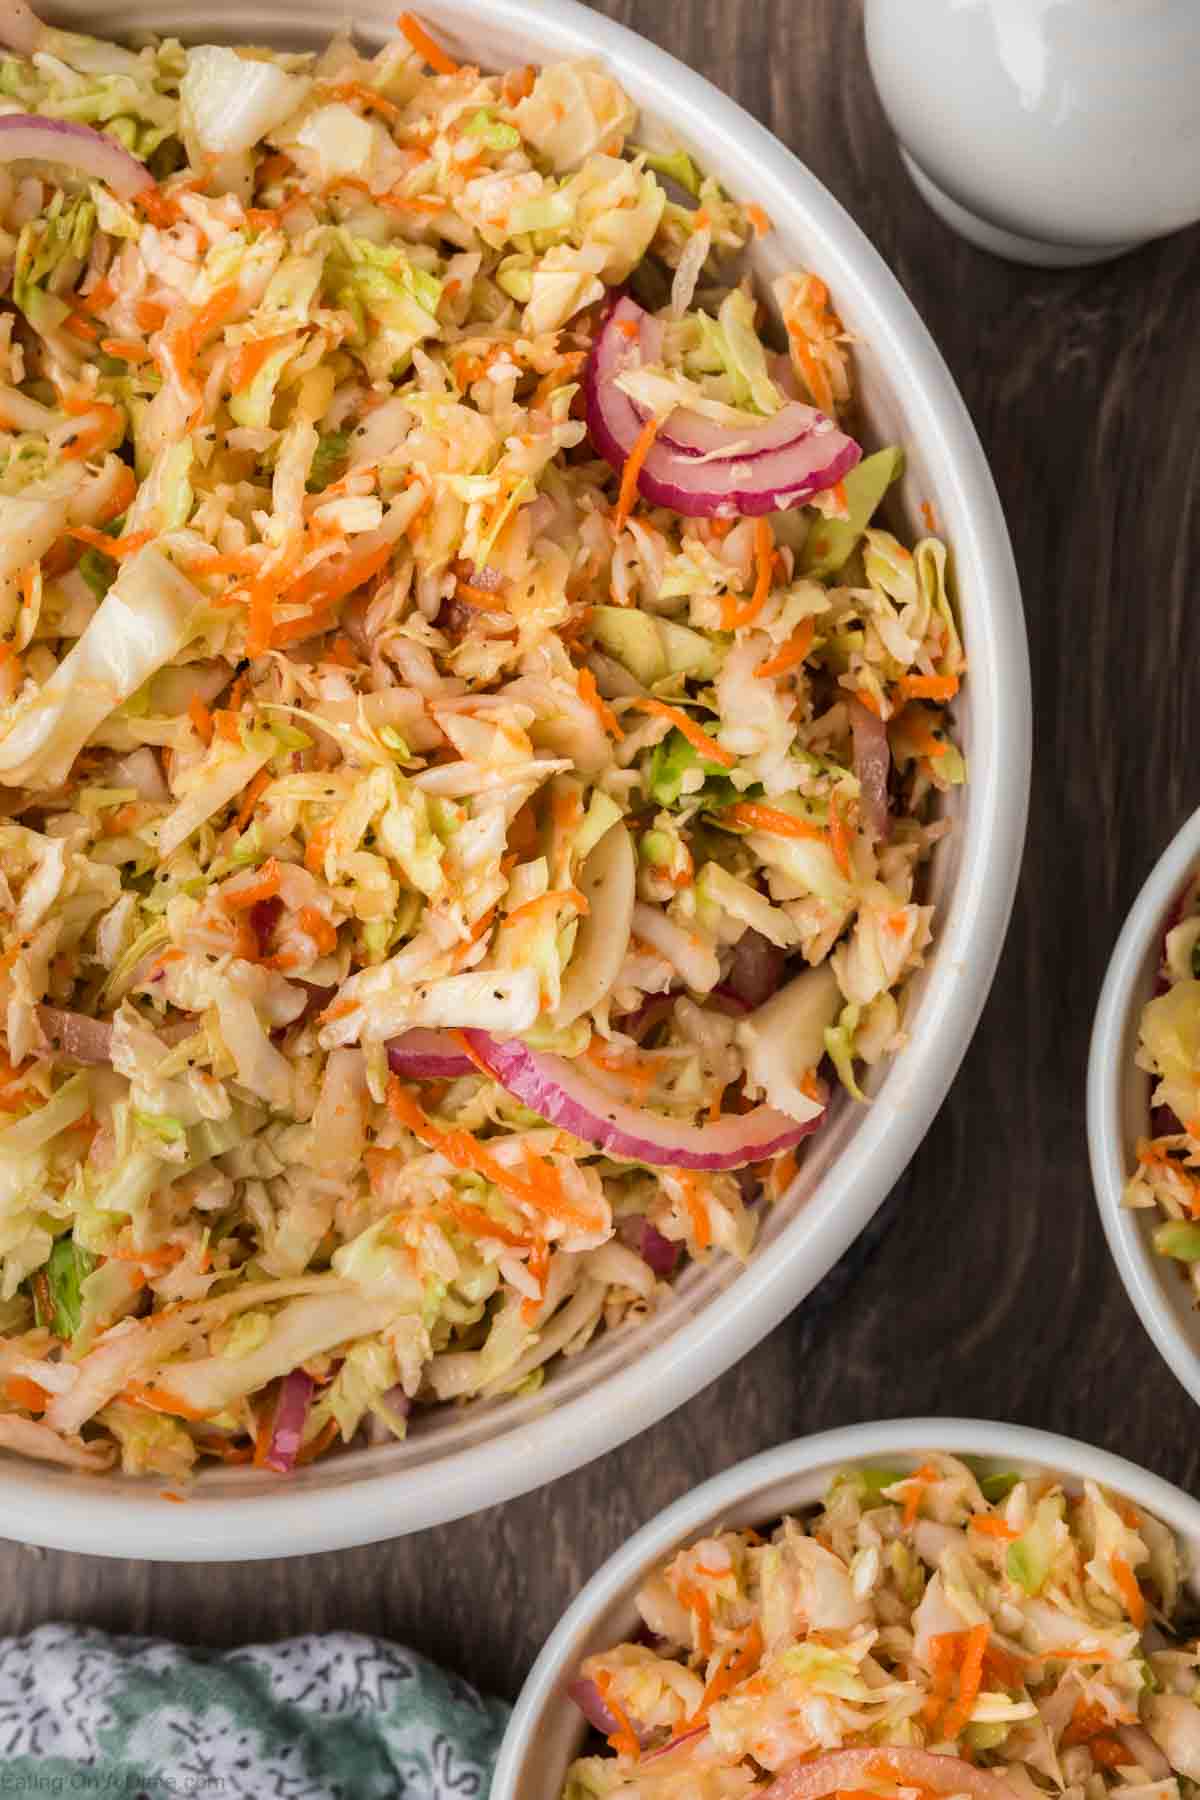 Vinegar Coleslaw in a white bowl ready to serve